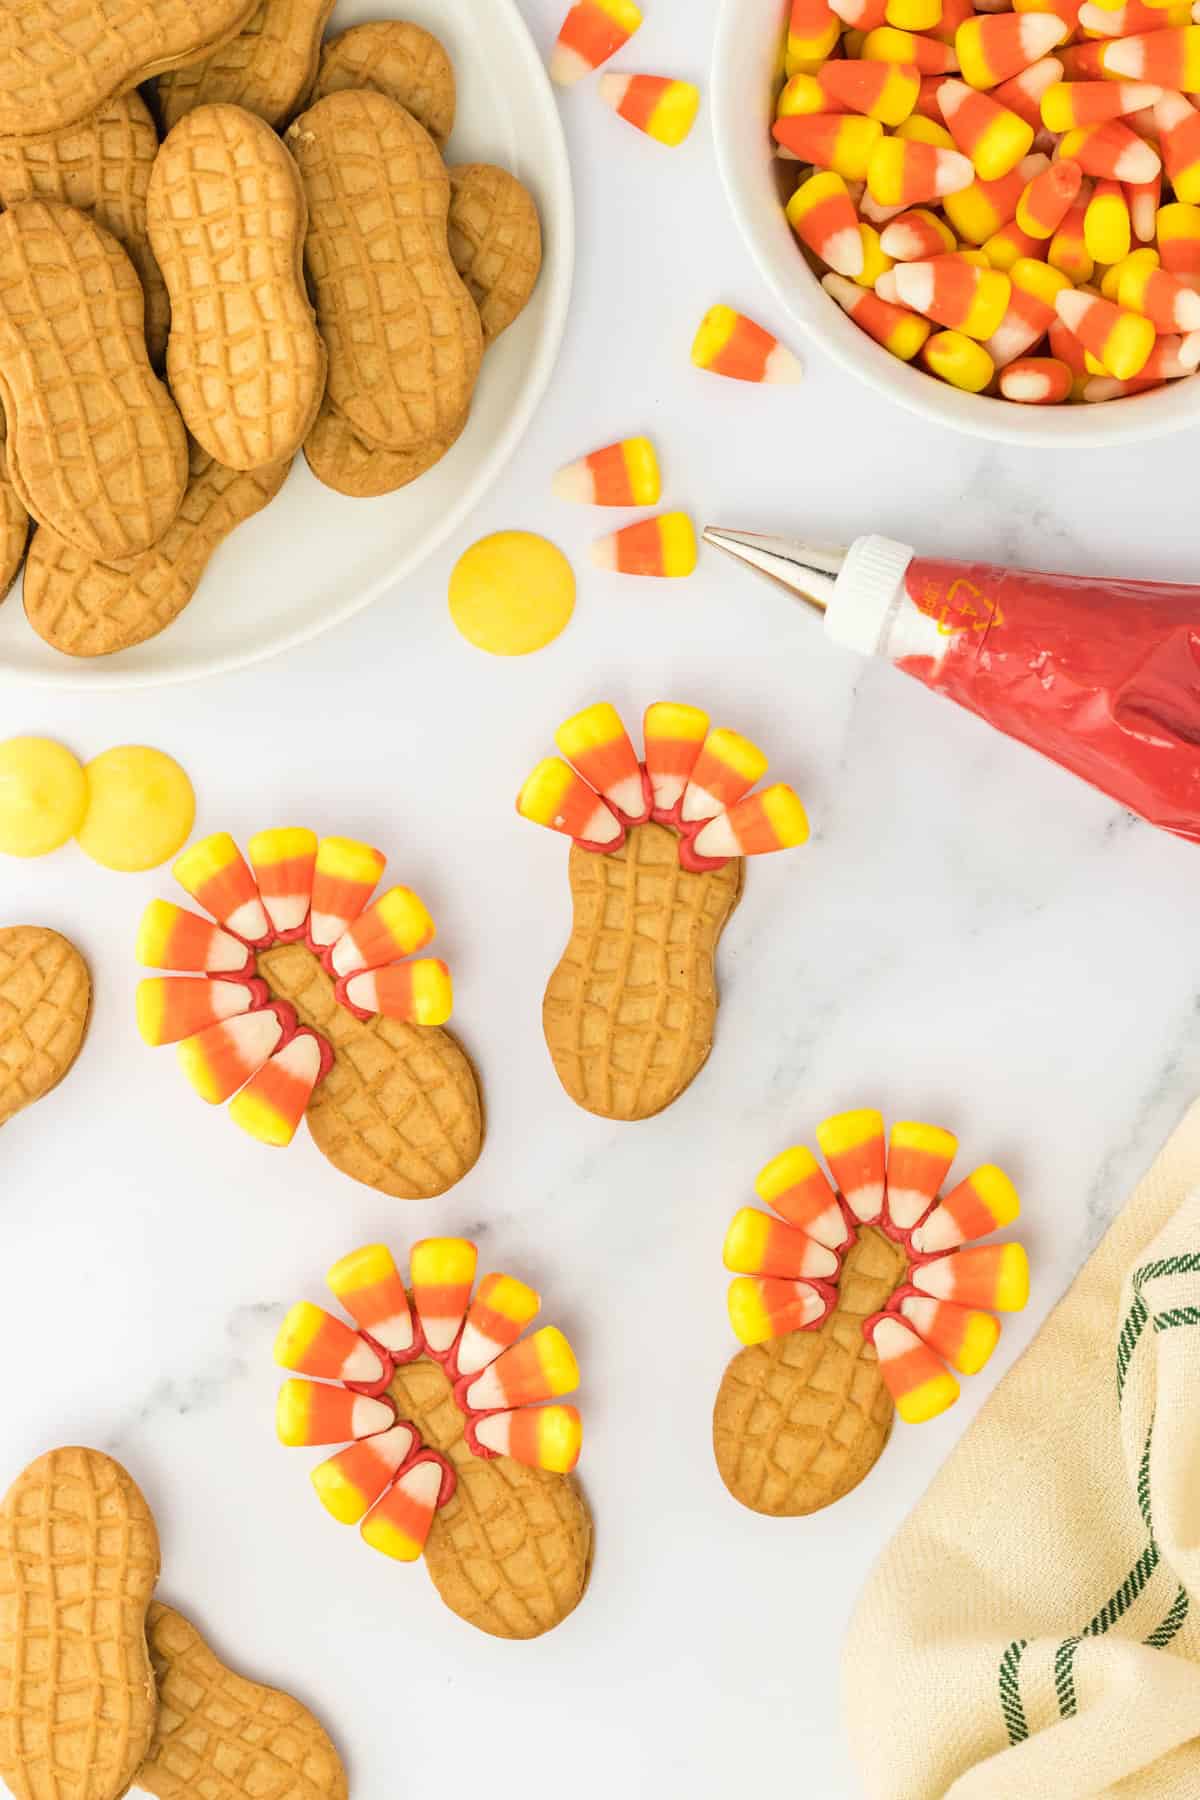 Put the Melted Candy Melts in a Pipped Bag and use it to attach 9 Candy Corns to the Outside Edge of one side of the Nutter Butter.